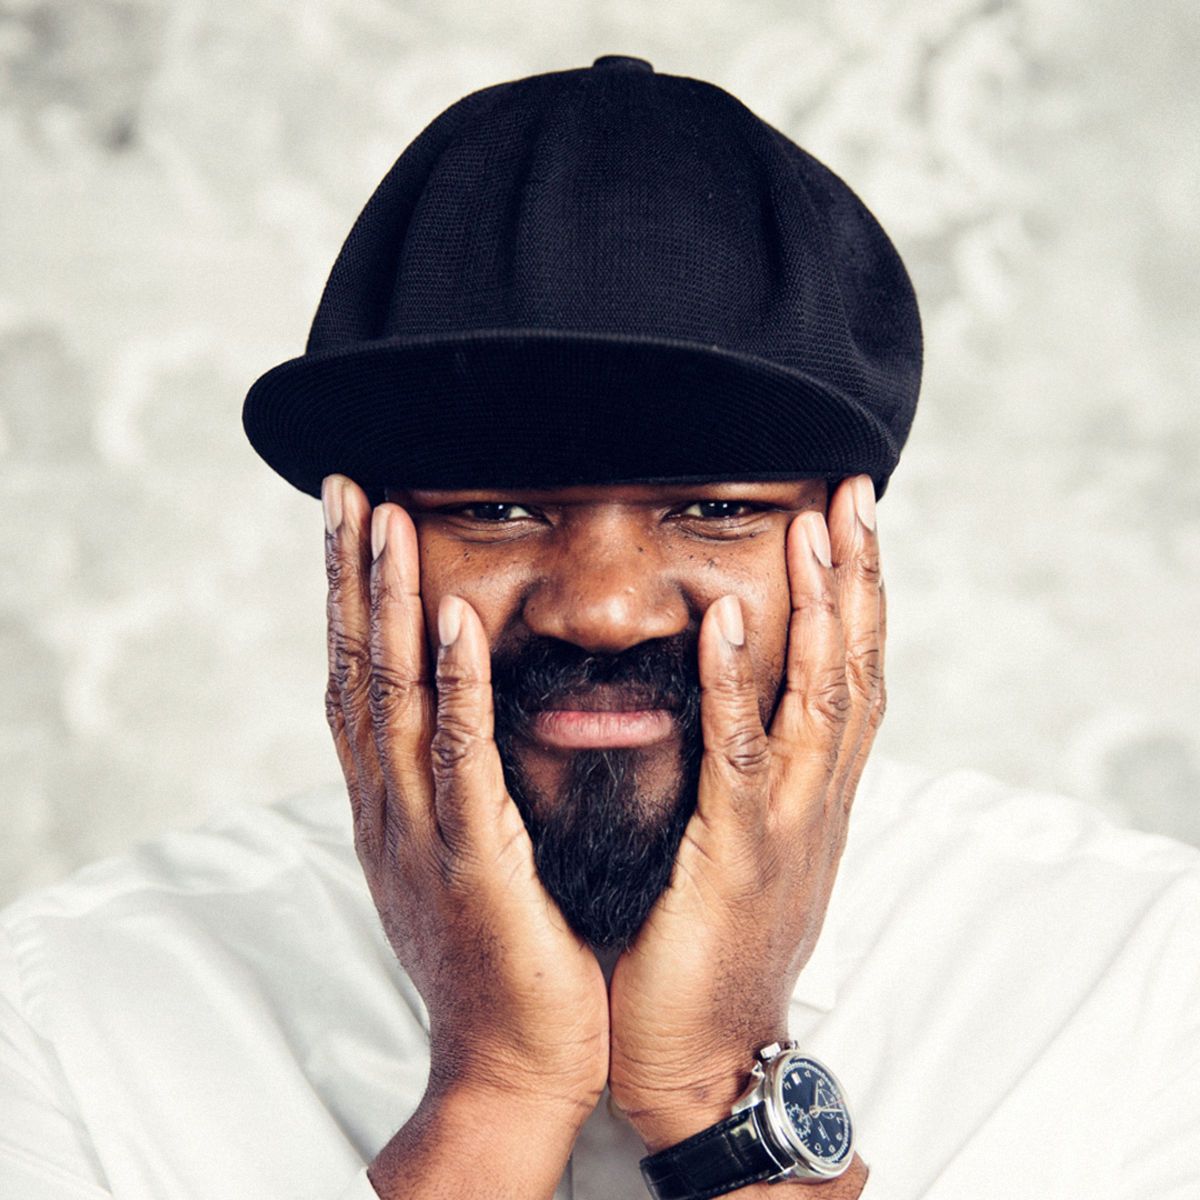 Gregory Porter at Isaac Stern Auditorium